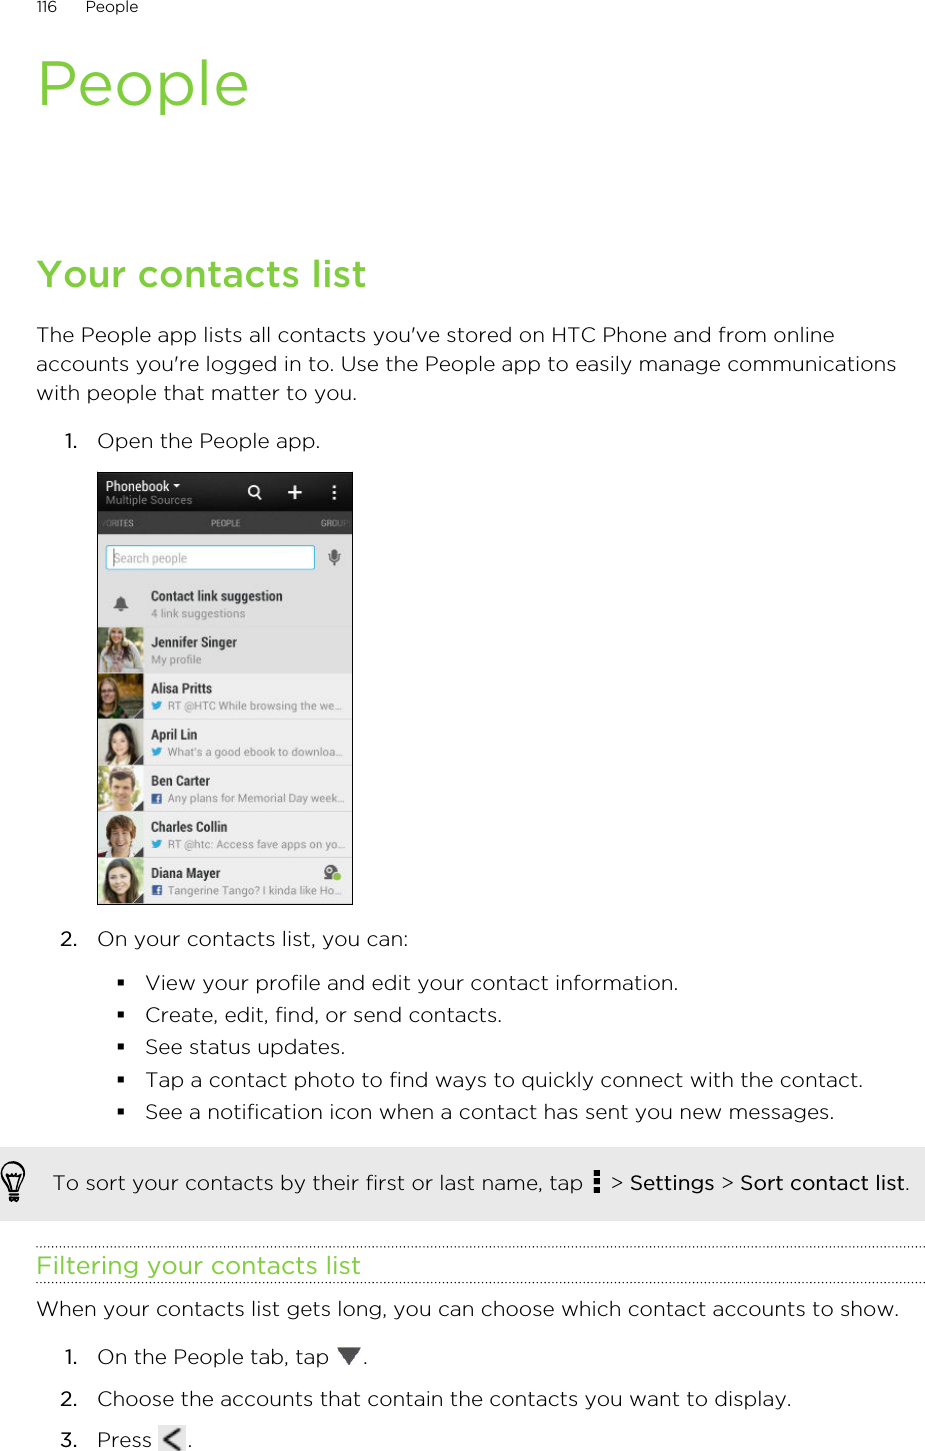 PeopleYour contacts listThe People app lists all contacts you&apos;ve stored on HTC Phone and from onlineaccounts you&apos;re logged in to. Use the People app to easily manage communicationswith people that matter to you.1. Open the People app. 2. On your contacts list, you can:§View your profile and edit your contact information.§Create, edit, find, or send contacts.§See status updates.§Tap a contact photo to find ways to quickly connect with the contact.§See a notification icon when a contact has sent you new messages.To sort your contacts by their first or last name, tap   &gt; Settings &gt; Sort contact list.Filtering your contacts listWhen your contacts list gets long, you can choose which contact accounts to show.1. On the People tab, tap  .2. Choose the accounts that contain the contacts you want to display.3. Press  .116 PeopleHTC Confidential for Certification HTC Confidential for Certification